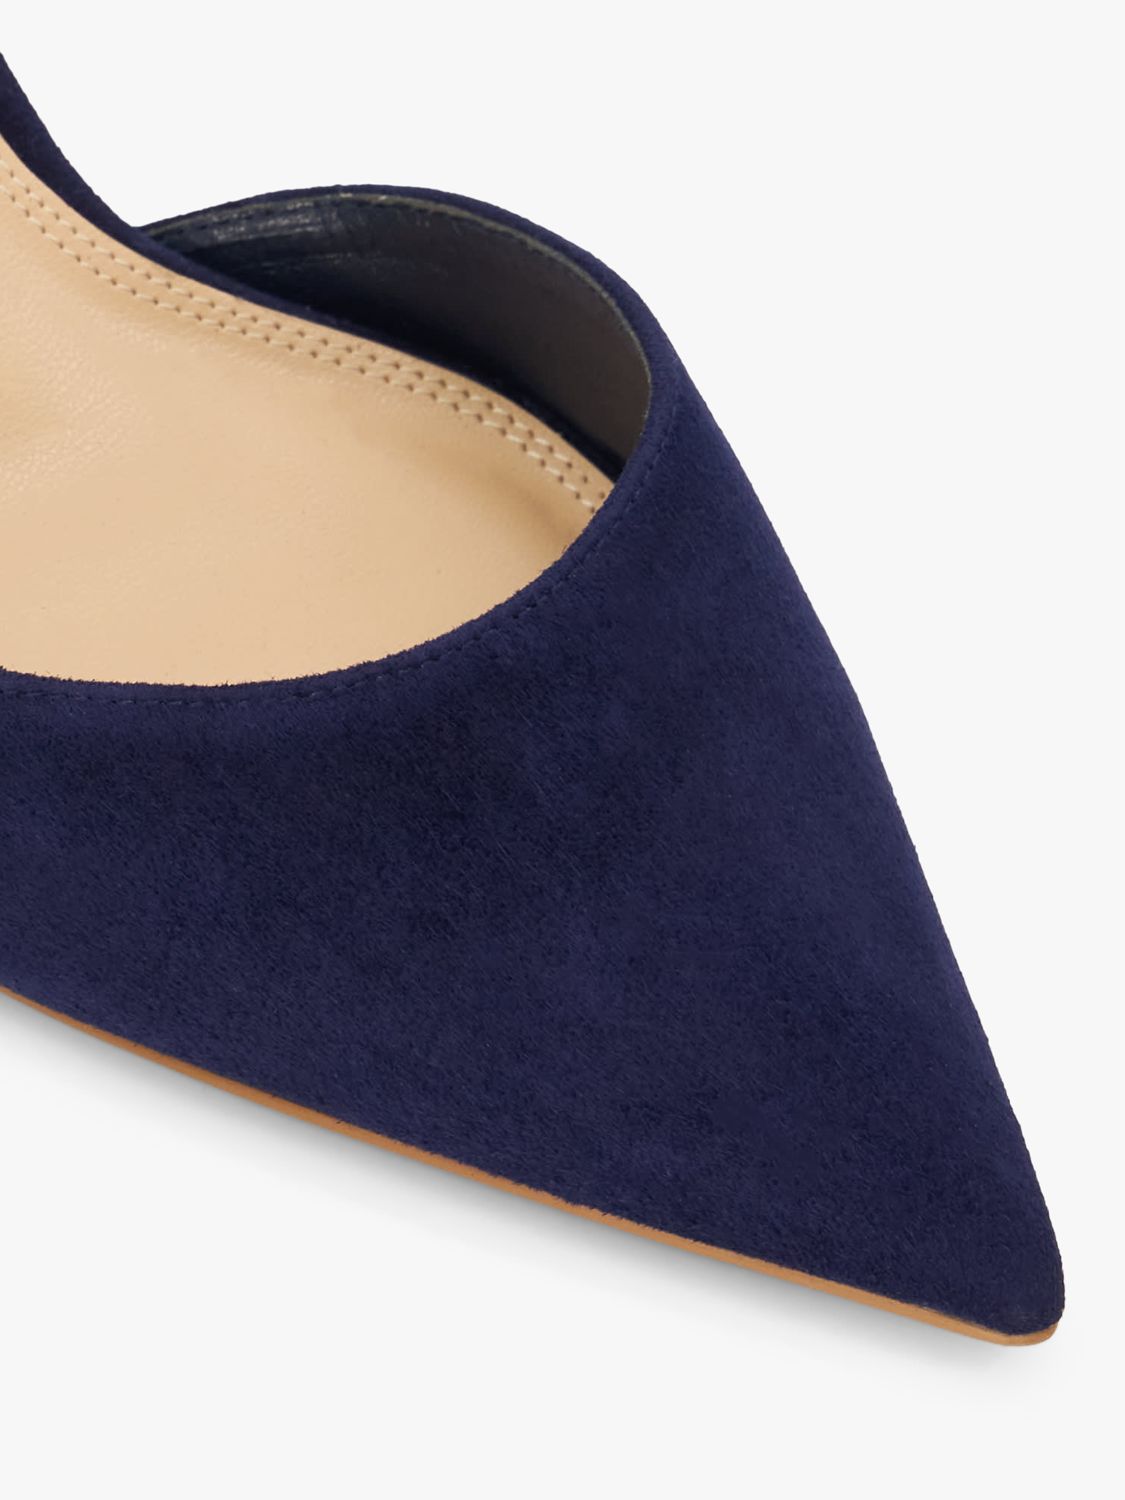 Dune Classical Suede Elasticated Pointed Shoes, Navy, EU40